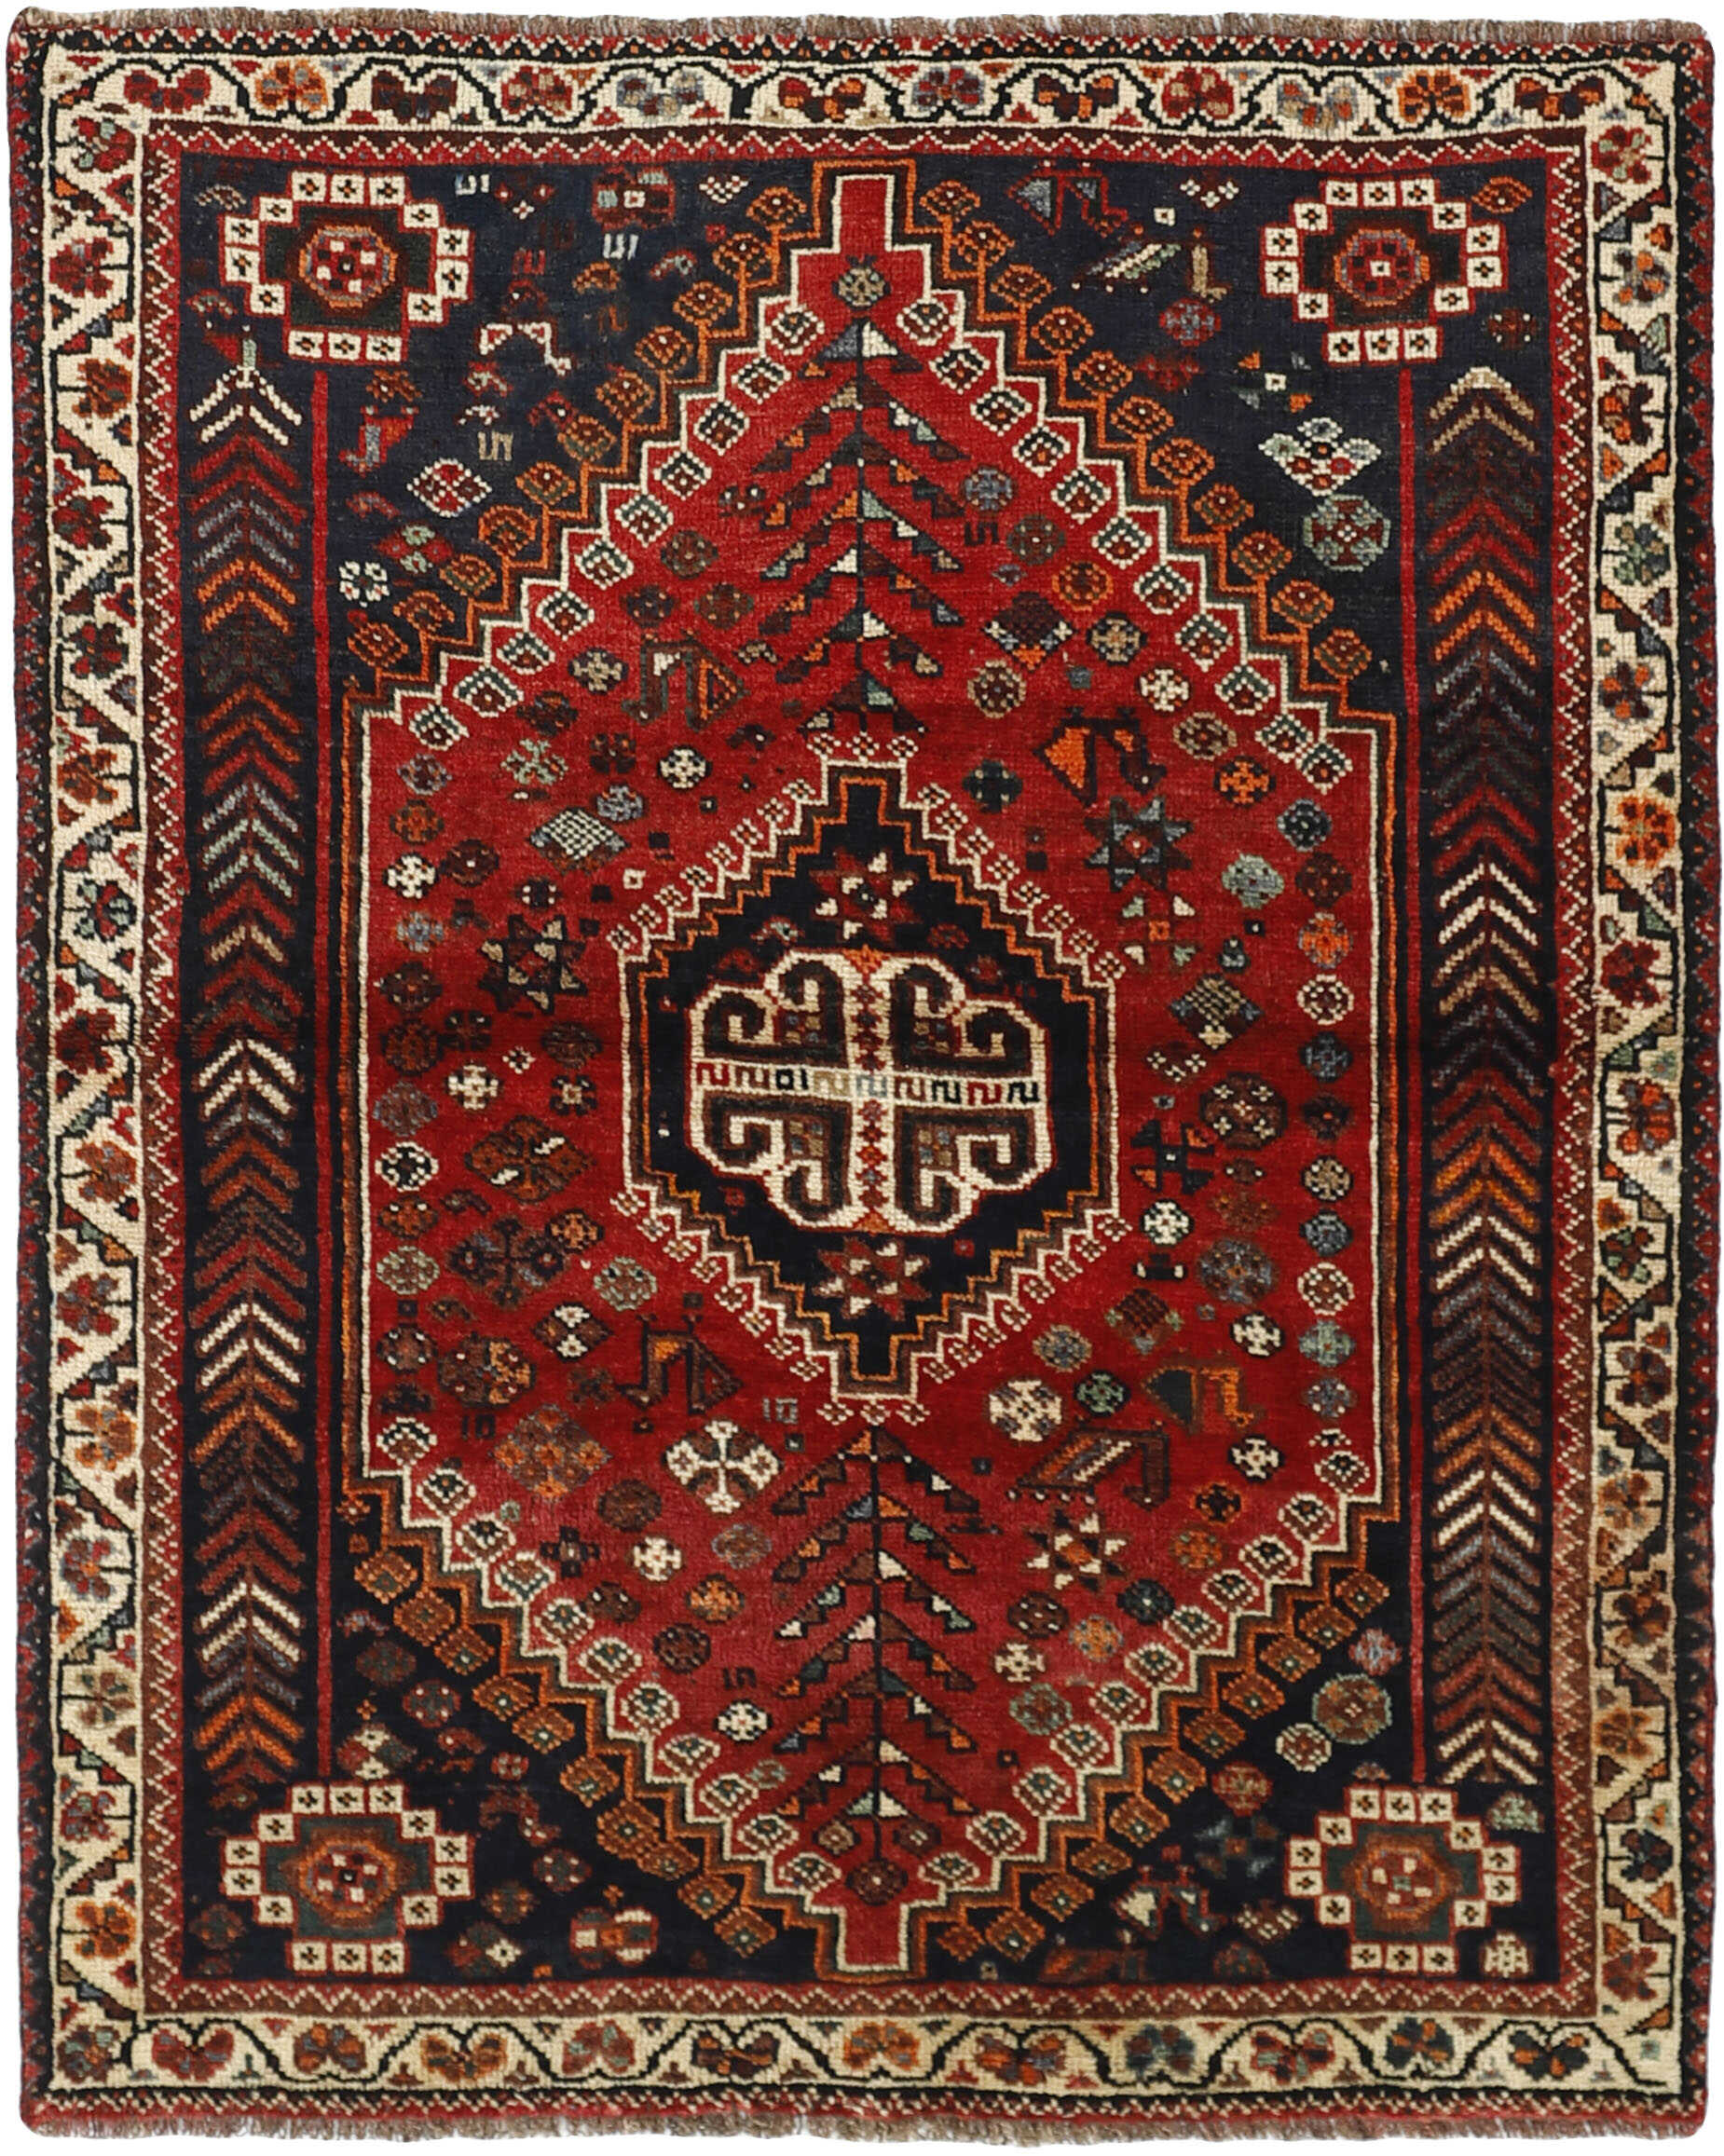 Authentic persian rug with a traditional tribal geometric pattern in red, black and beige